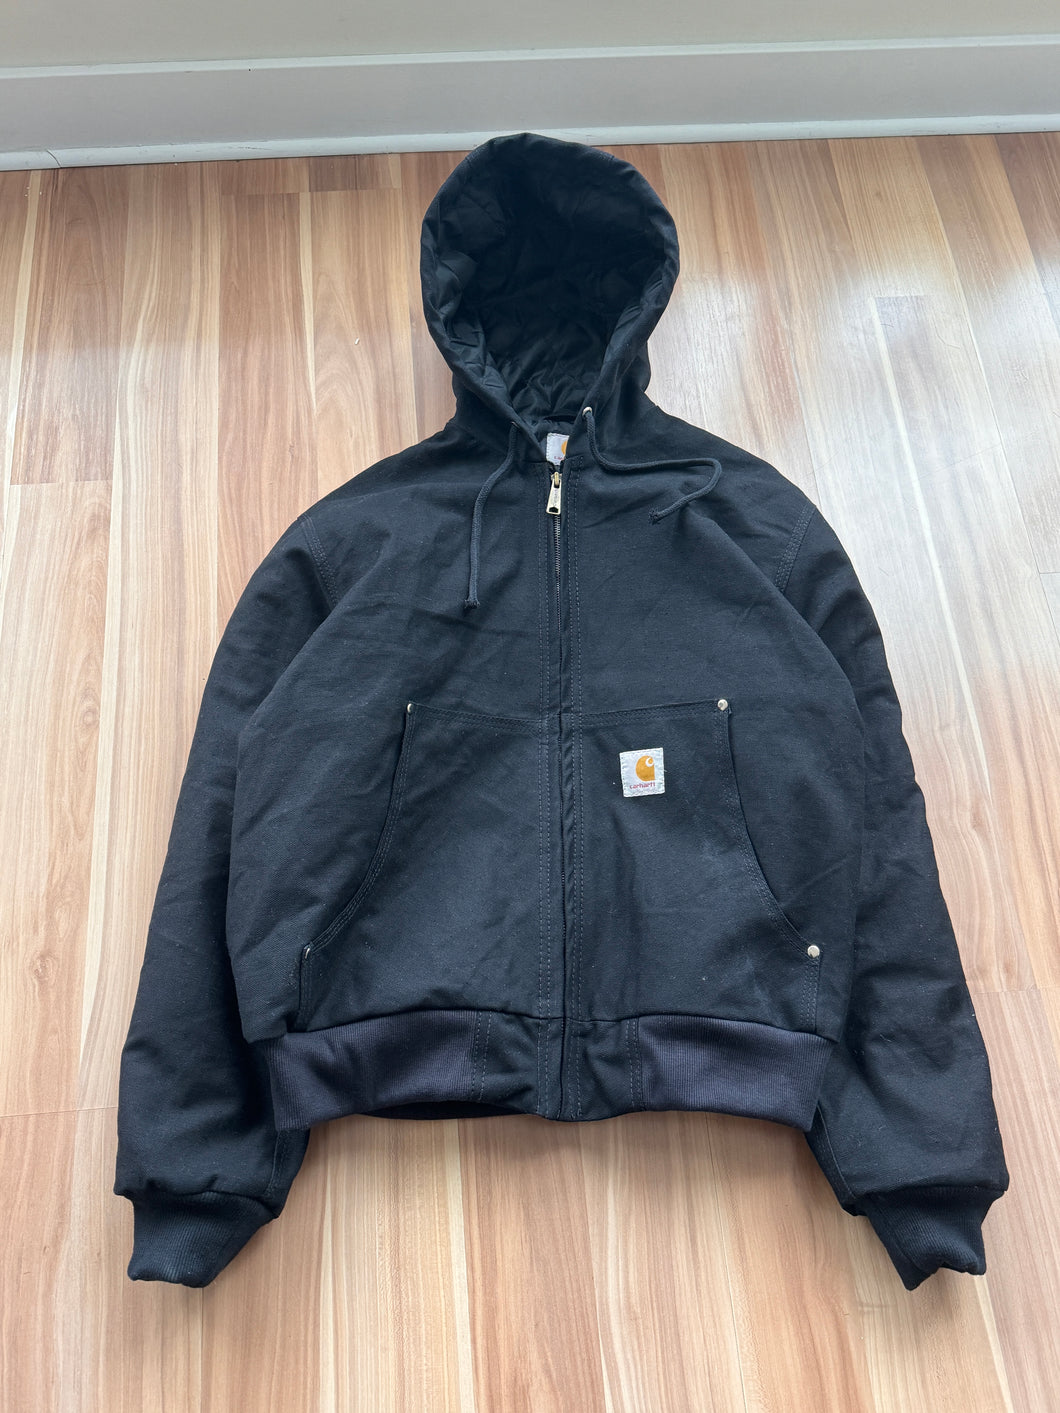 Carhartt Hooded Reworked Jacket - Small, Medium & Large Available